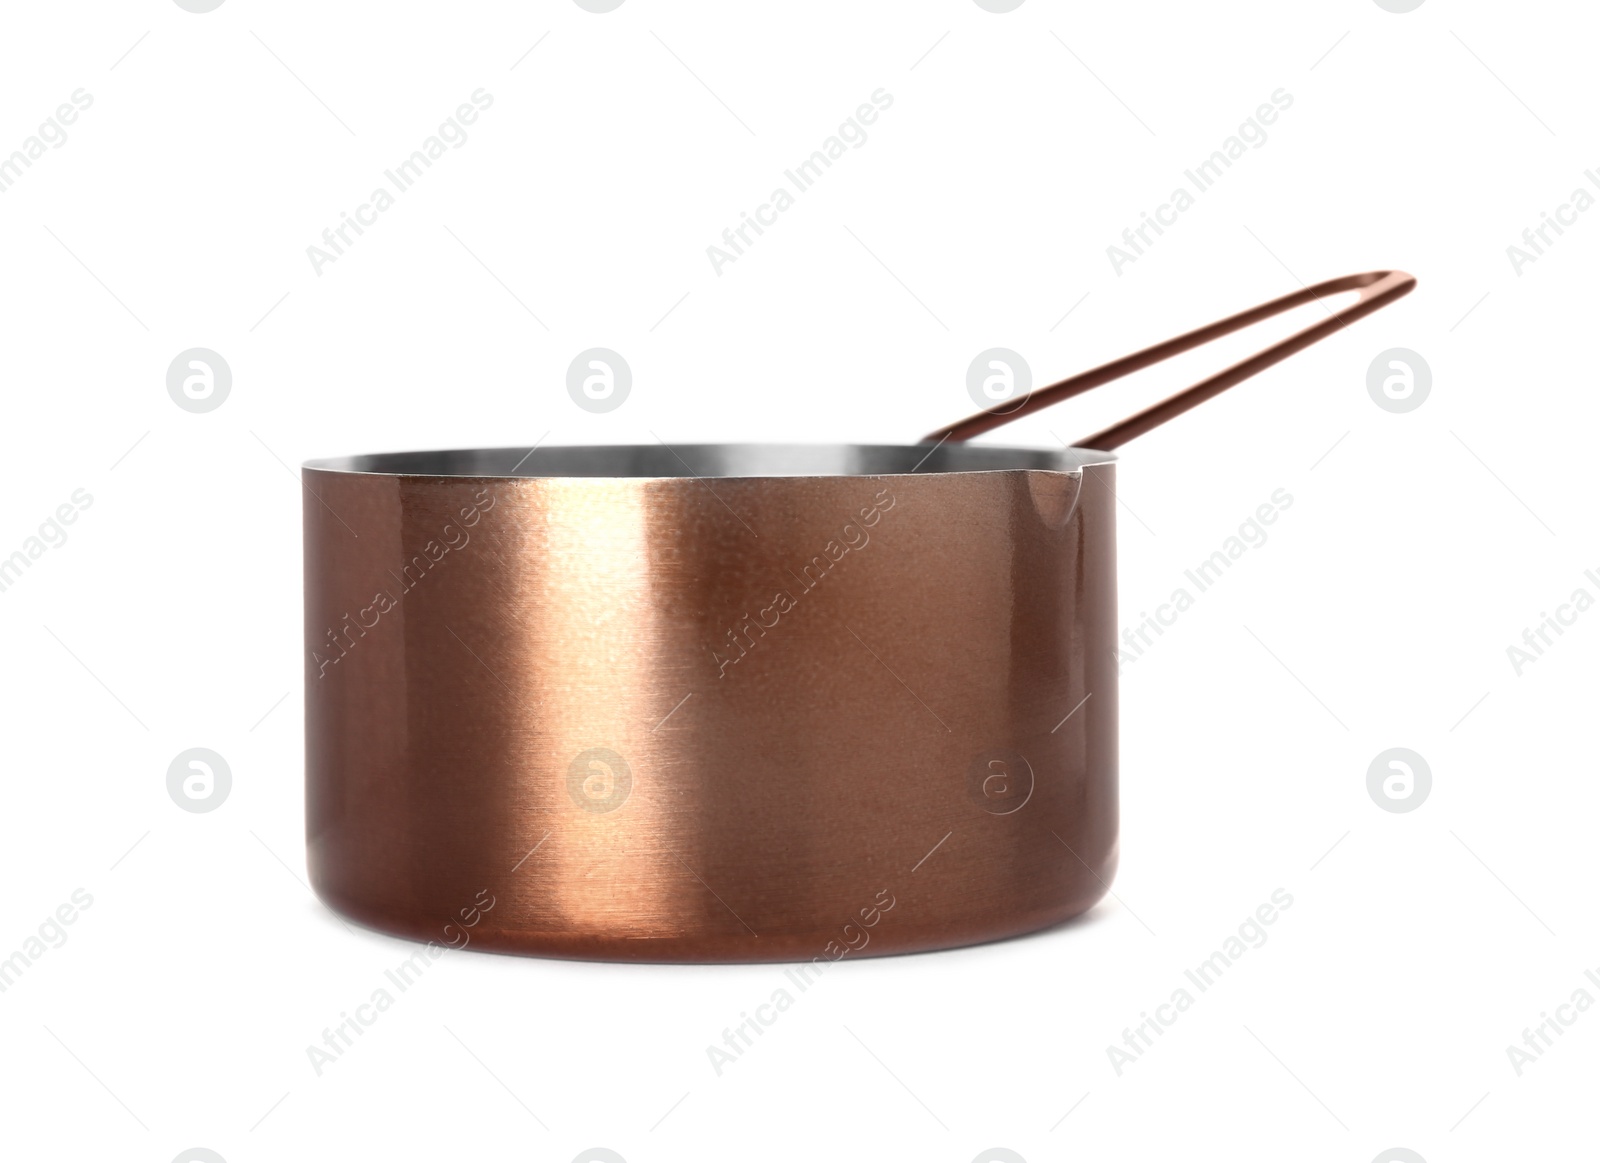 Photo of New modern metal saucepan isolated on white